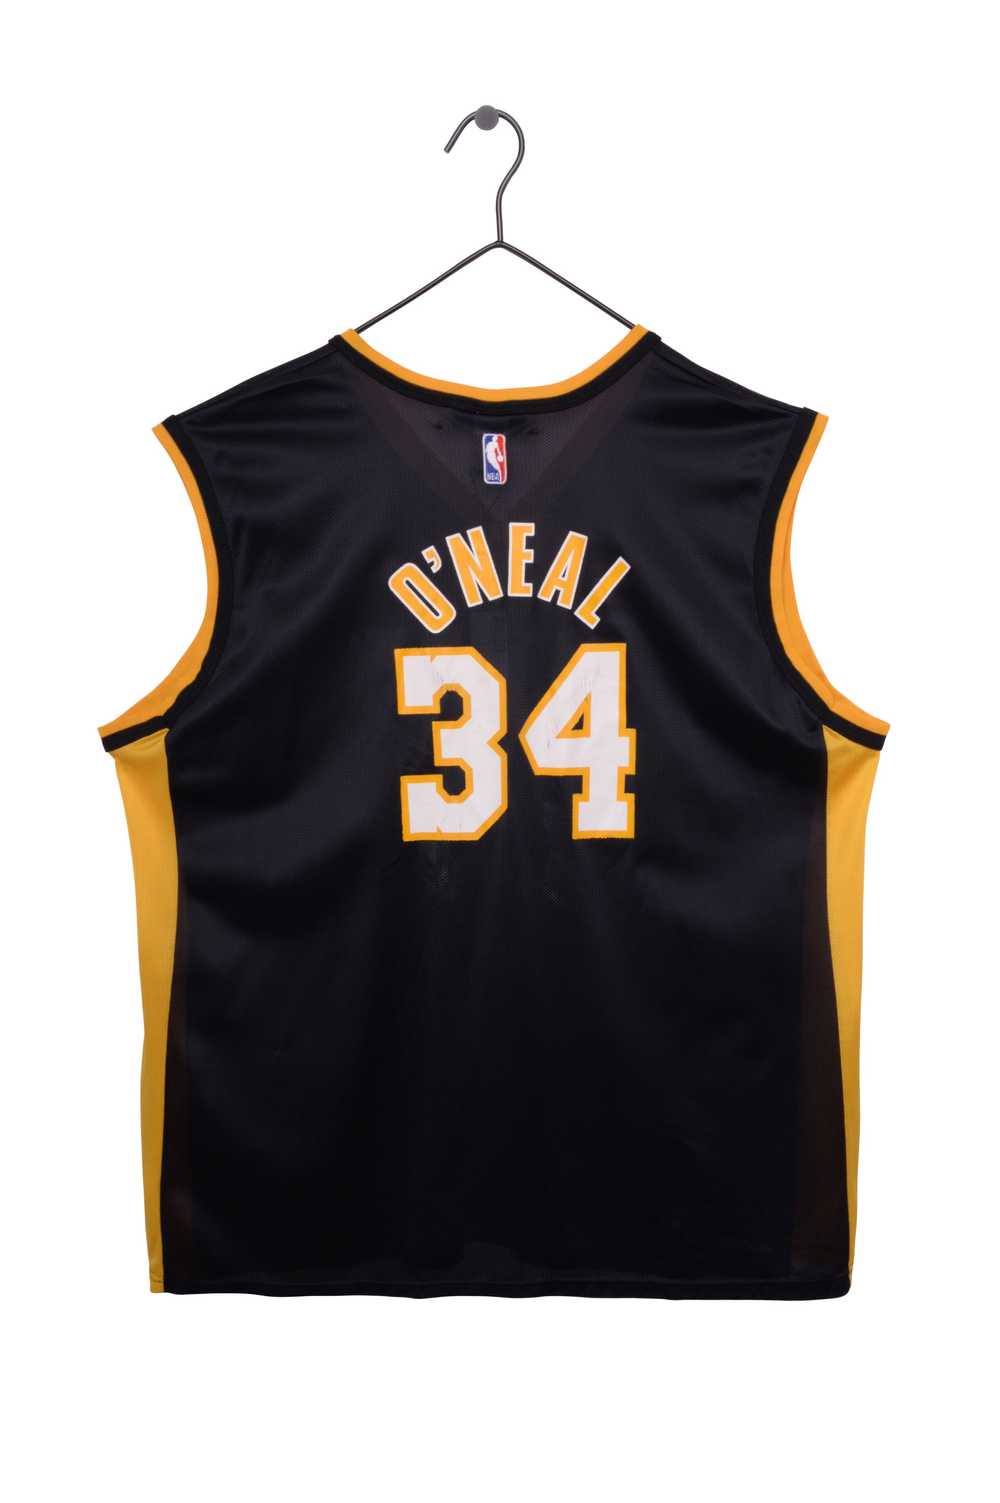 Los Angeles Lakers O'Neal Jersey - image 2